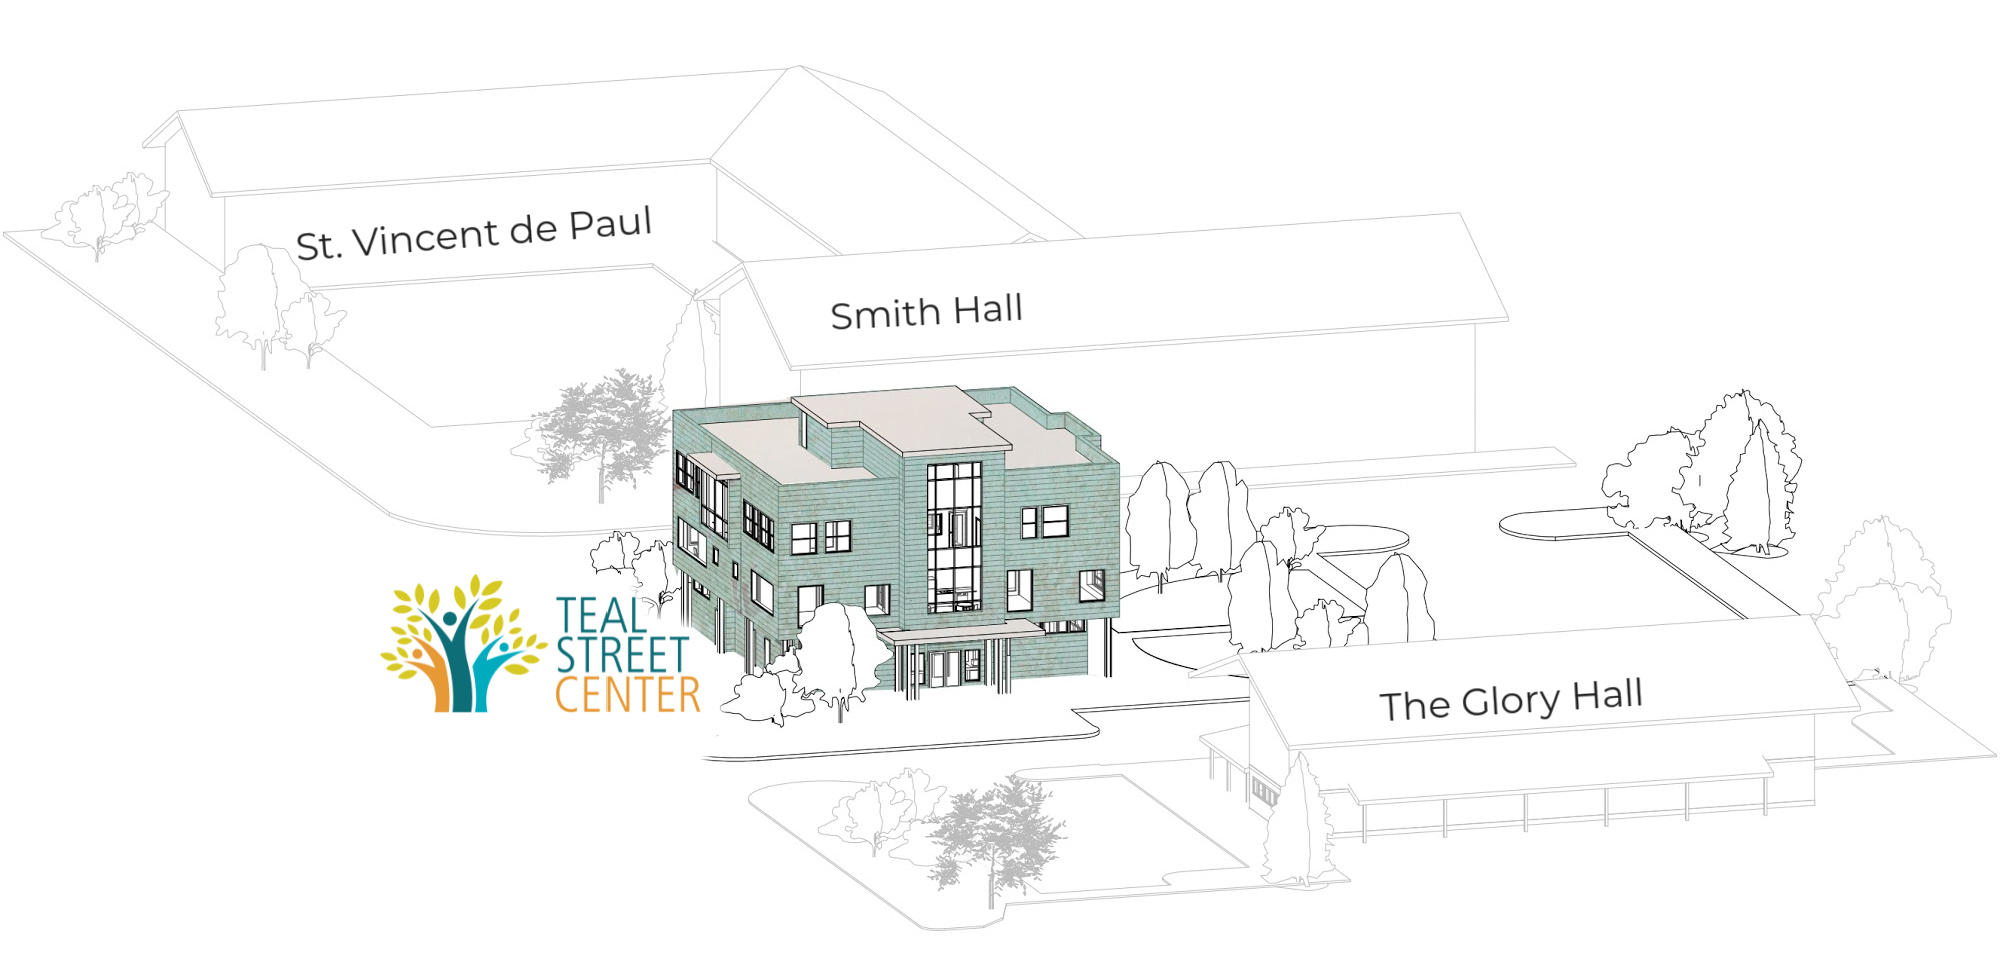 site plan that shows Teal St. Center in relation to the new Glory Hall homeless shelter, Smith Hall and St Vincent de Paul